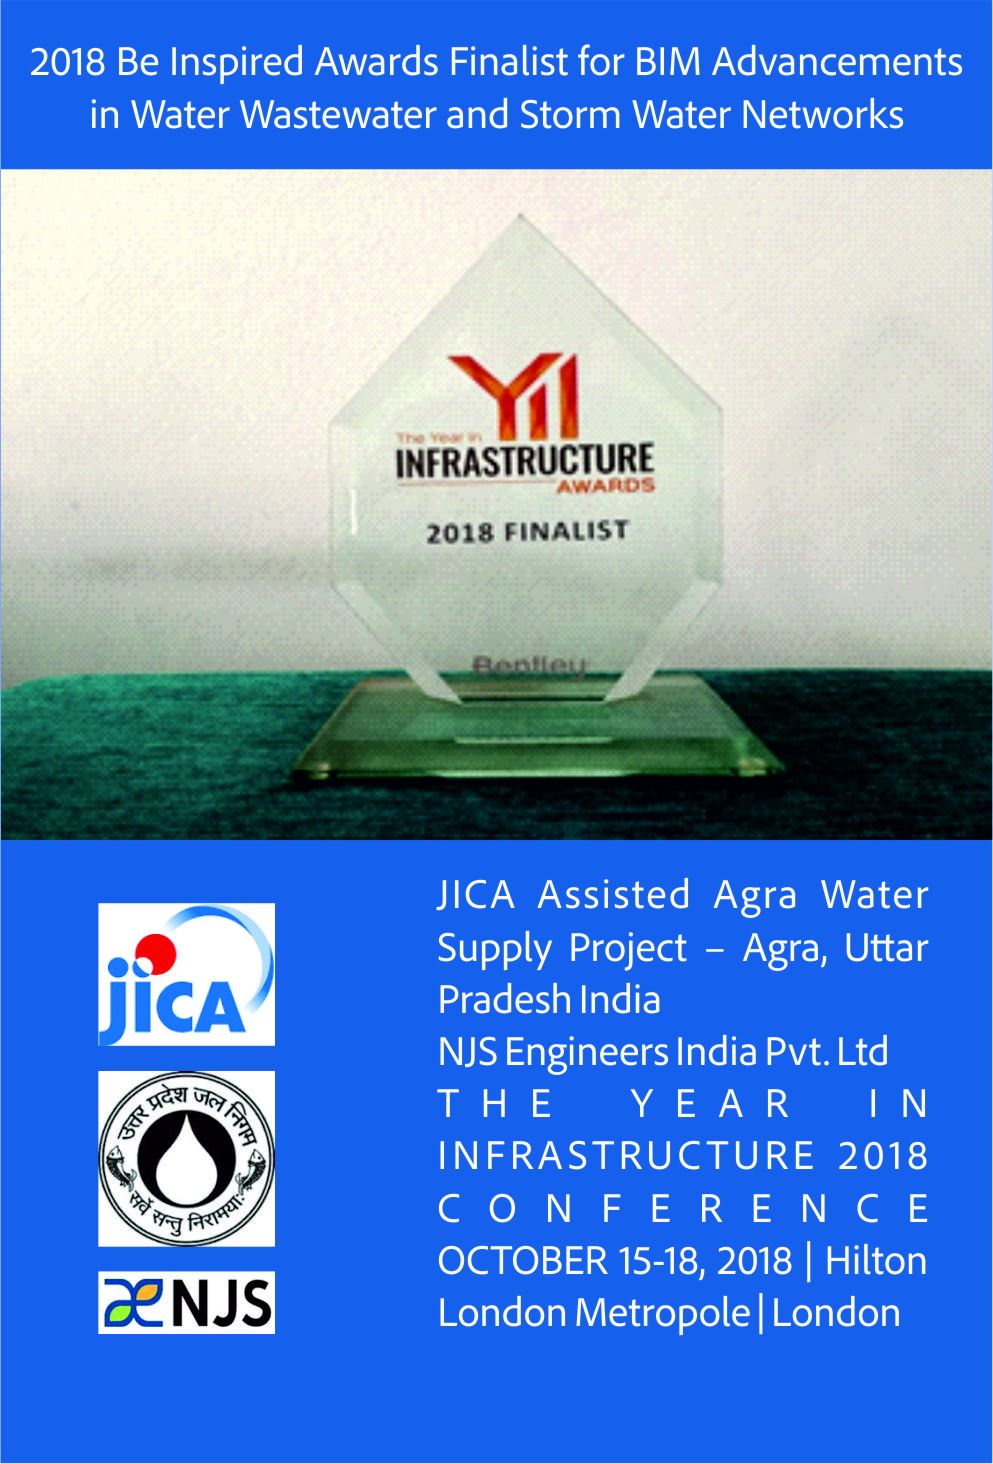 JICA Assisted Agra Water Supply Project, Agra